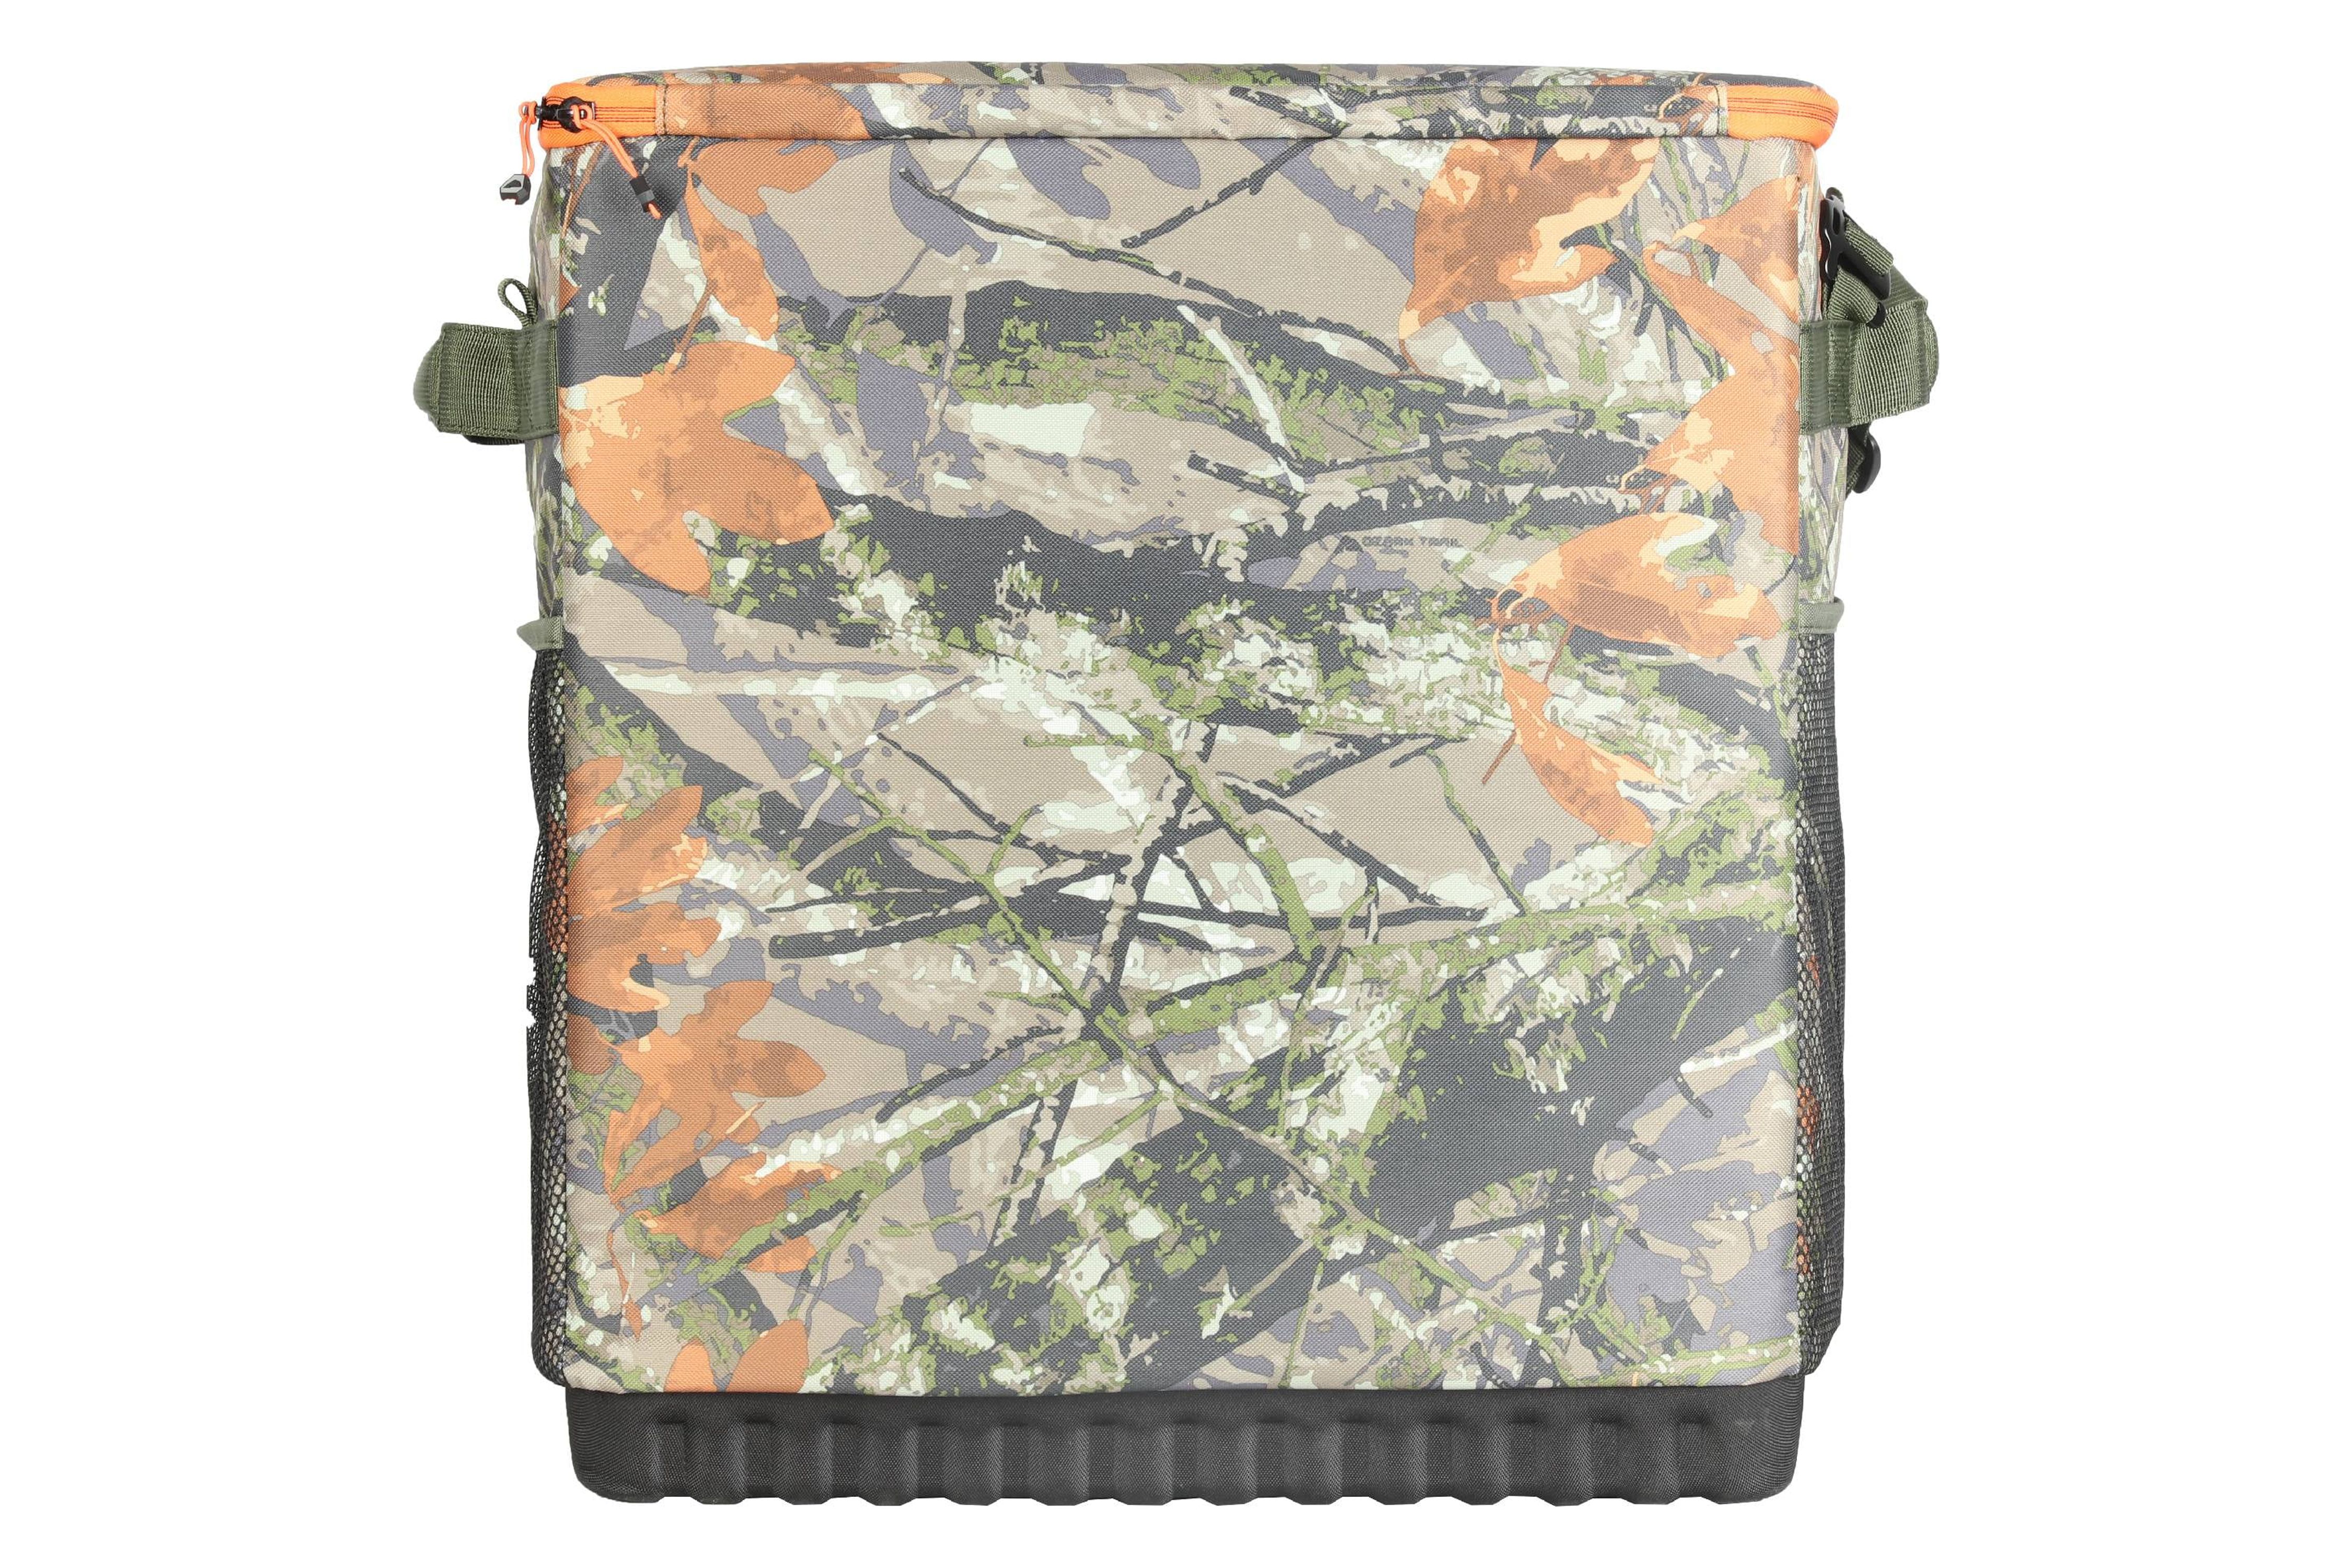 Ozark Trail Crane Lake Deluxe Camp and Outdoor Storage Organizer, Green Camo - image 3 of 10